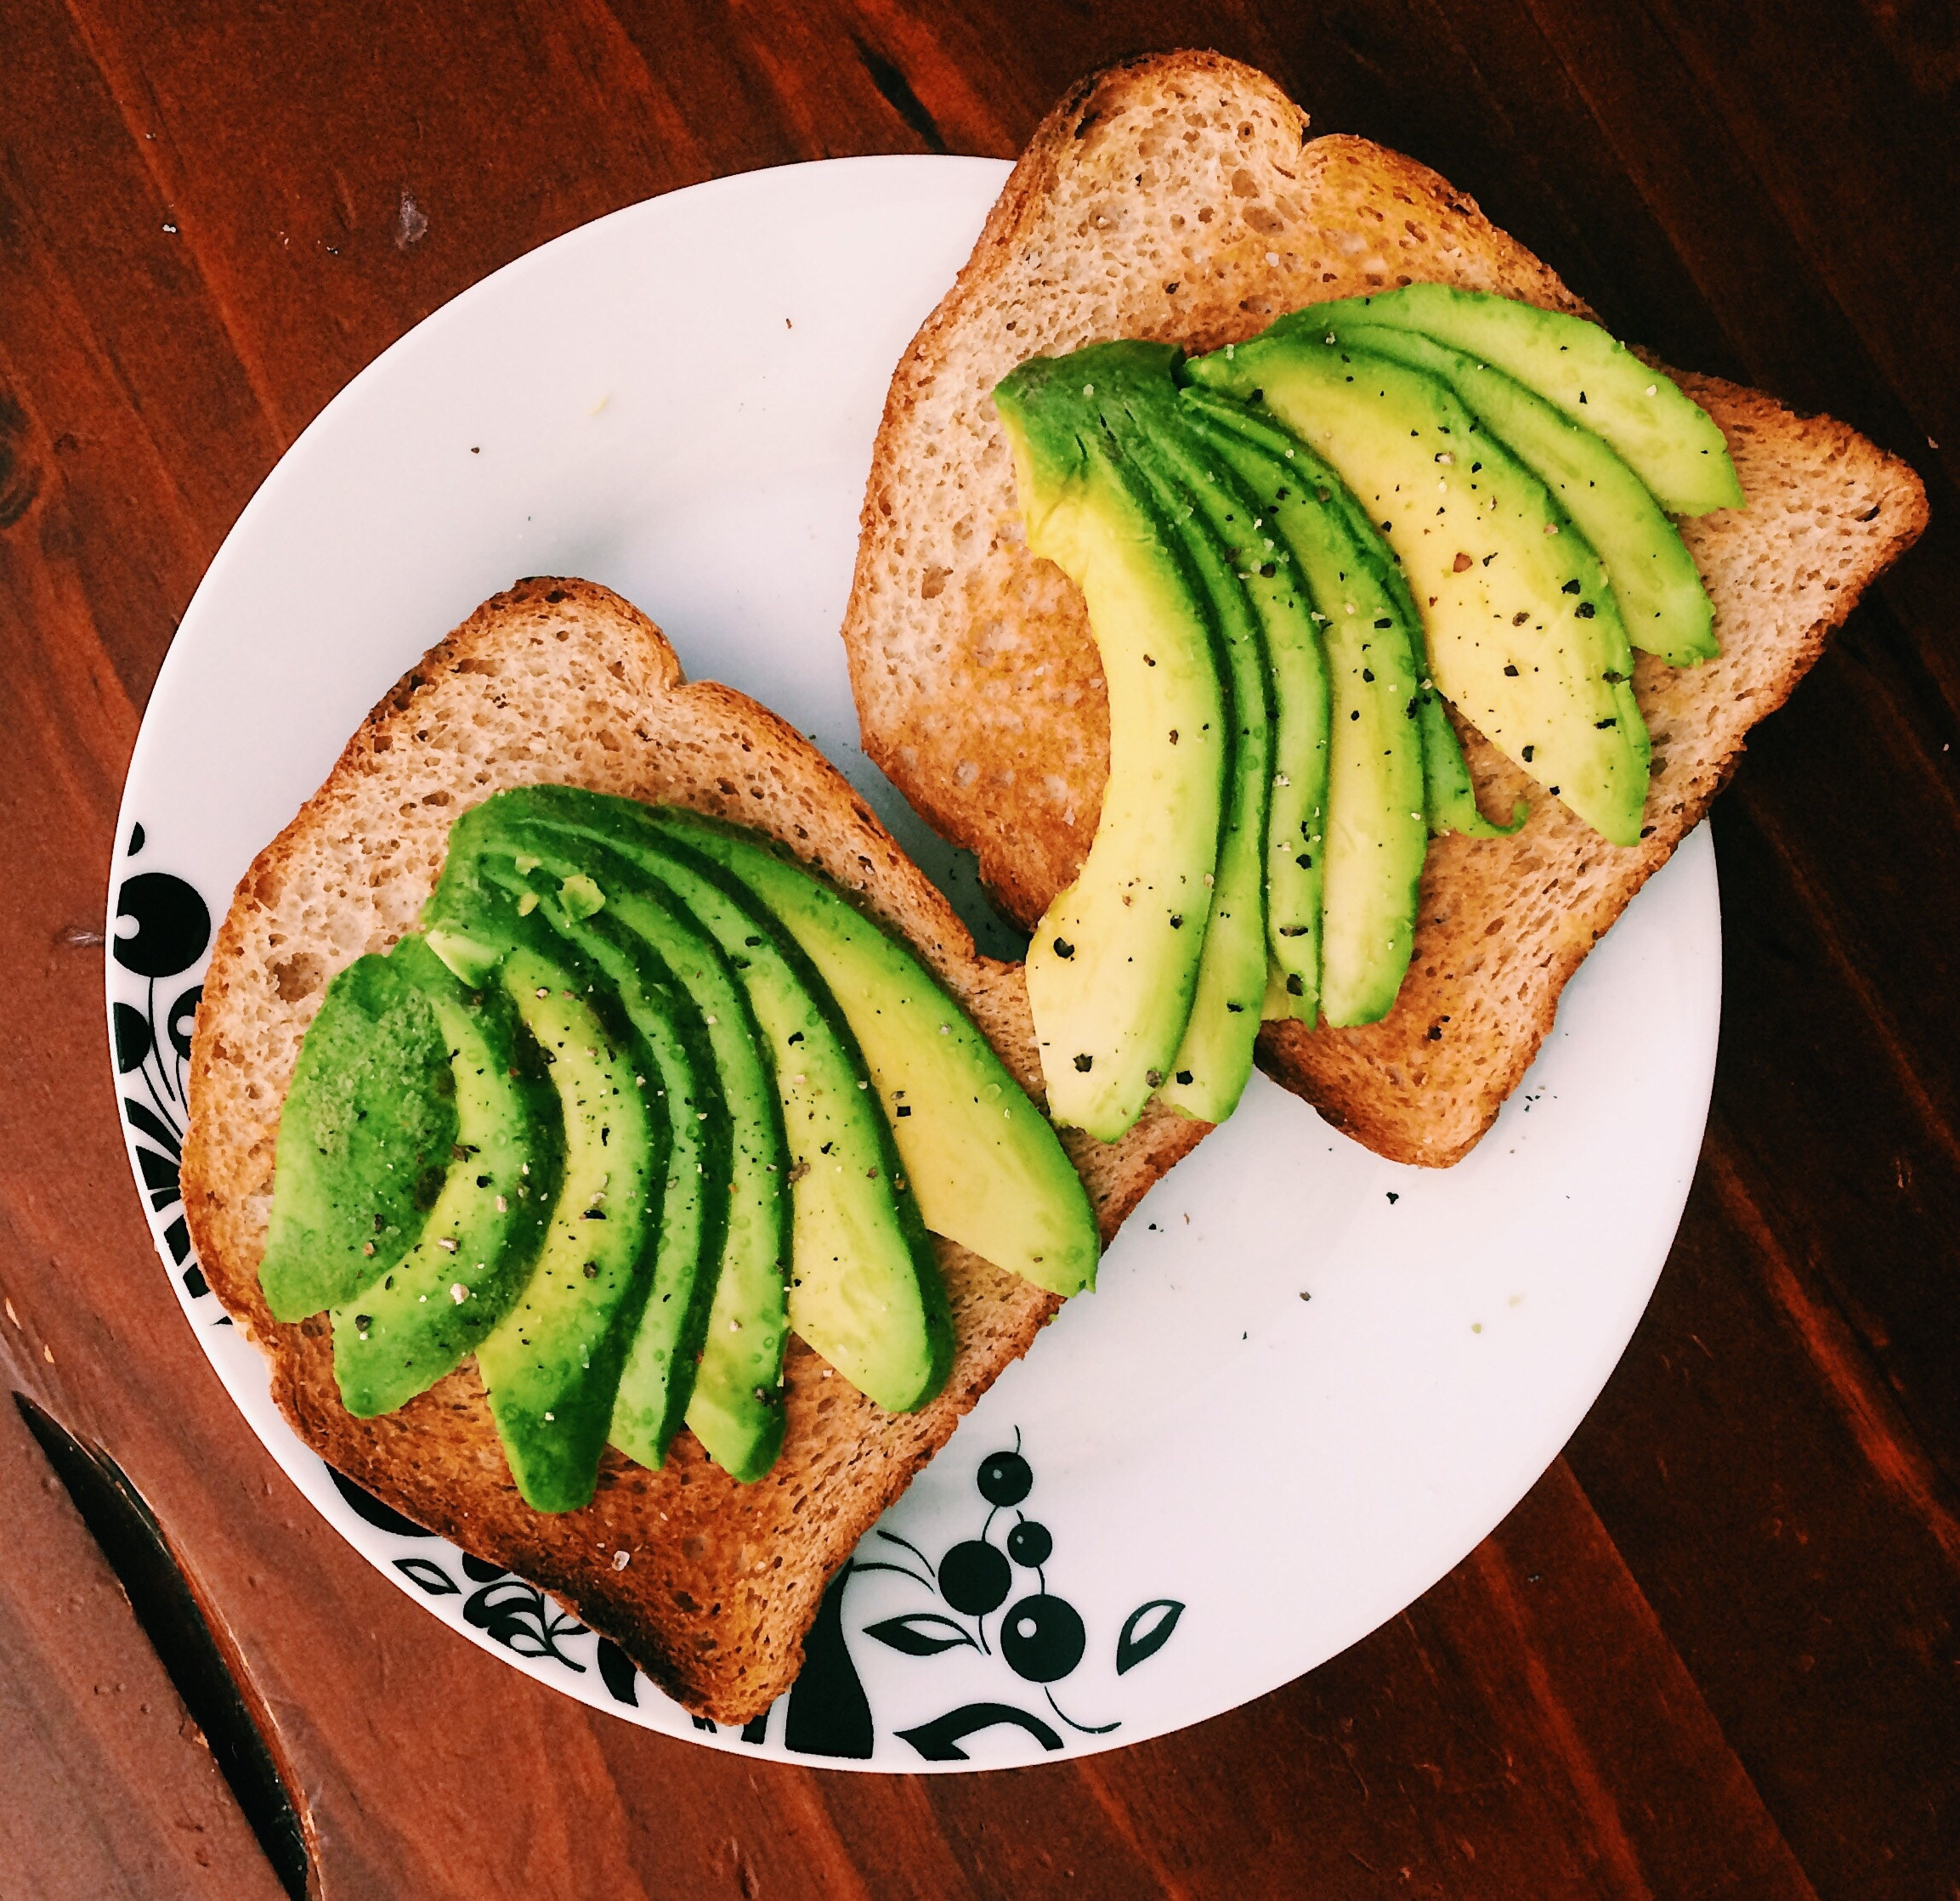 Whole wheat toast with slices of avocado on them